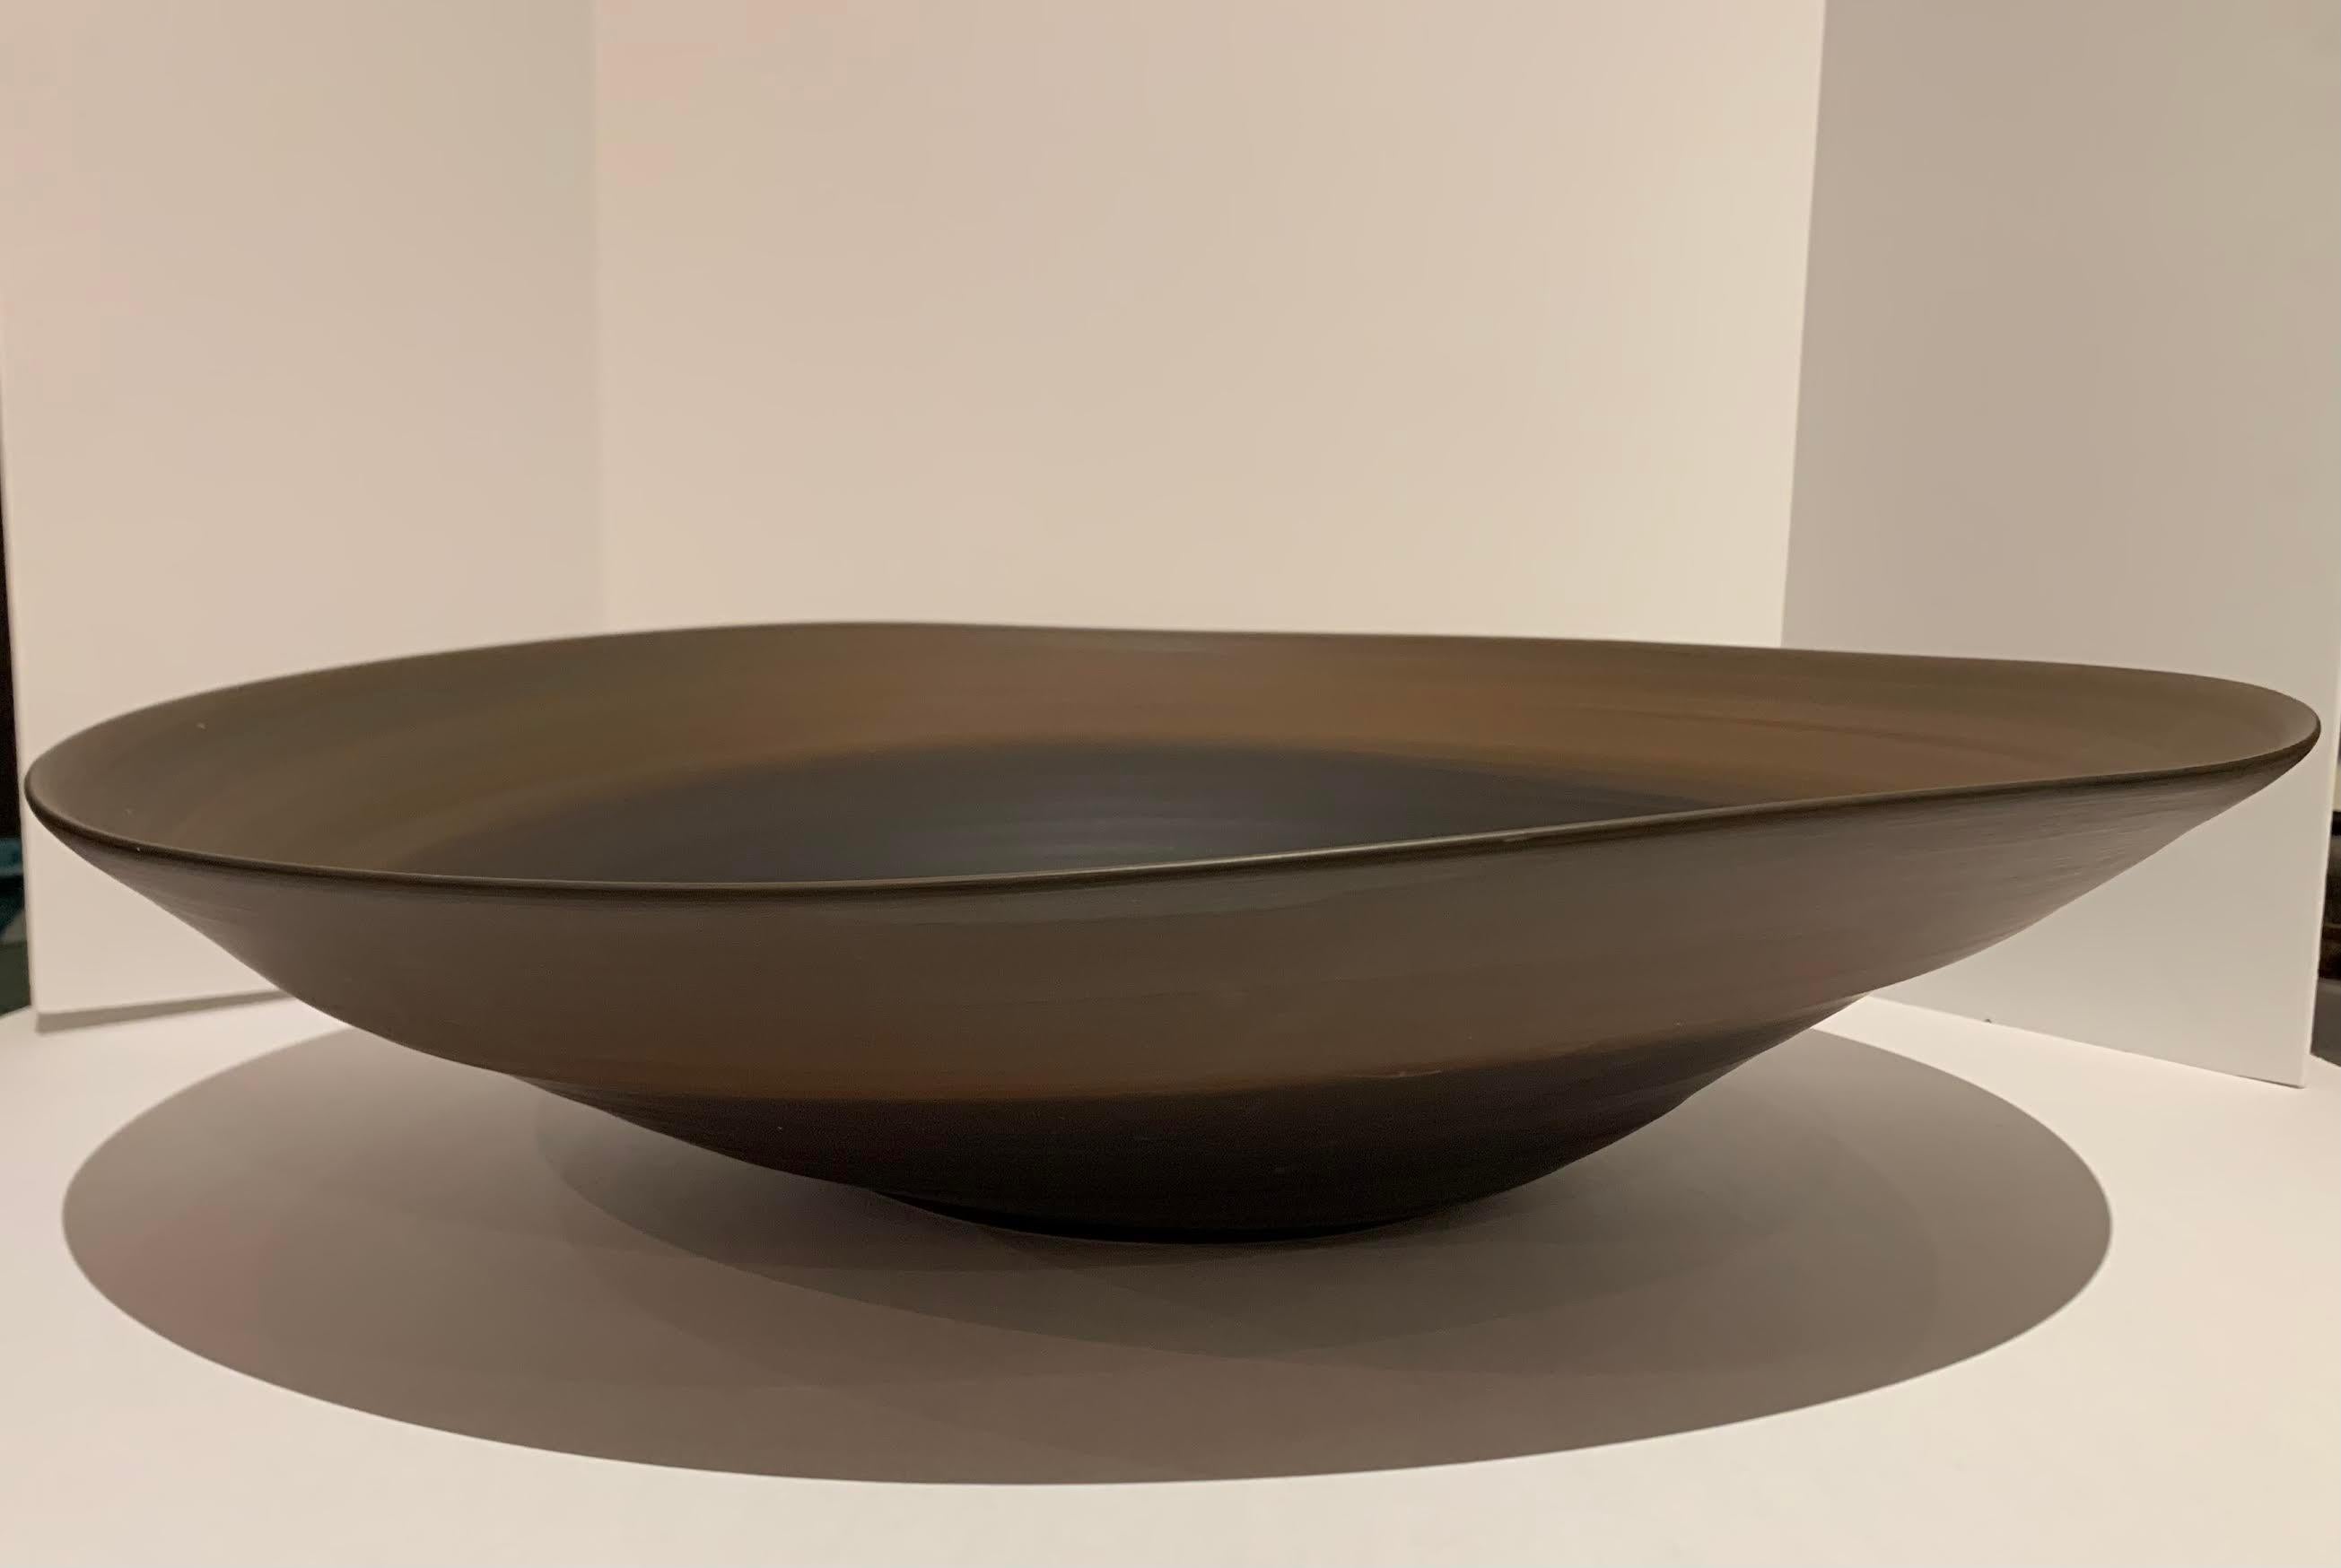 Coffee and black circular design contemporary Italian extra large fine ceramic bowl.
The black center is surrounded by a beautiful coffee color rim.
On the exterior, the black base is topped by the coffee color rim.
The bowl is handmade and has an